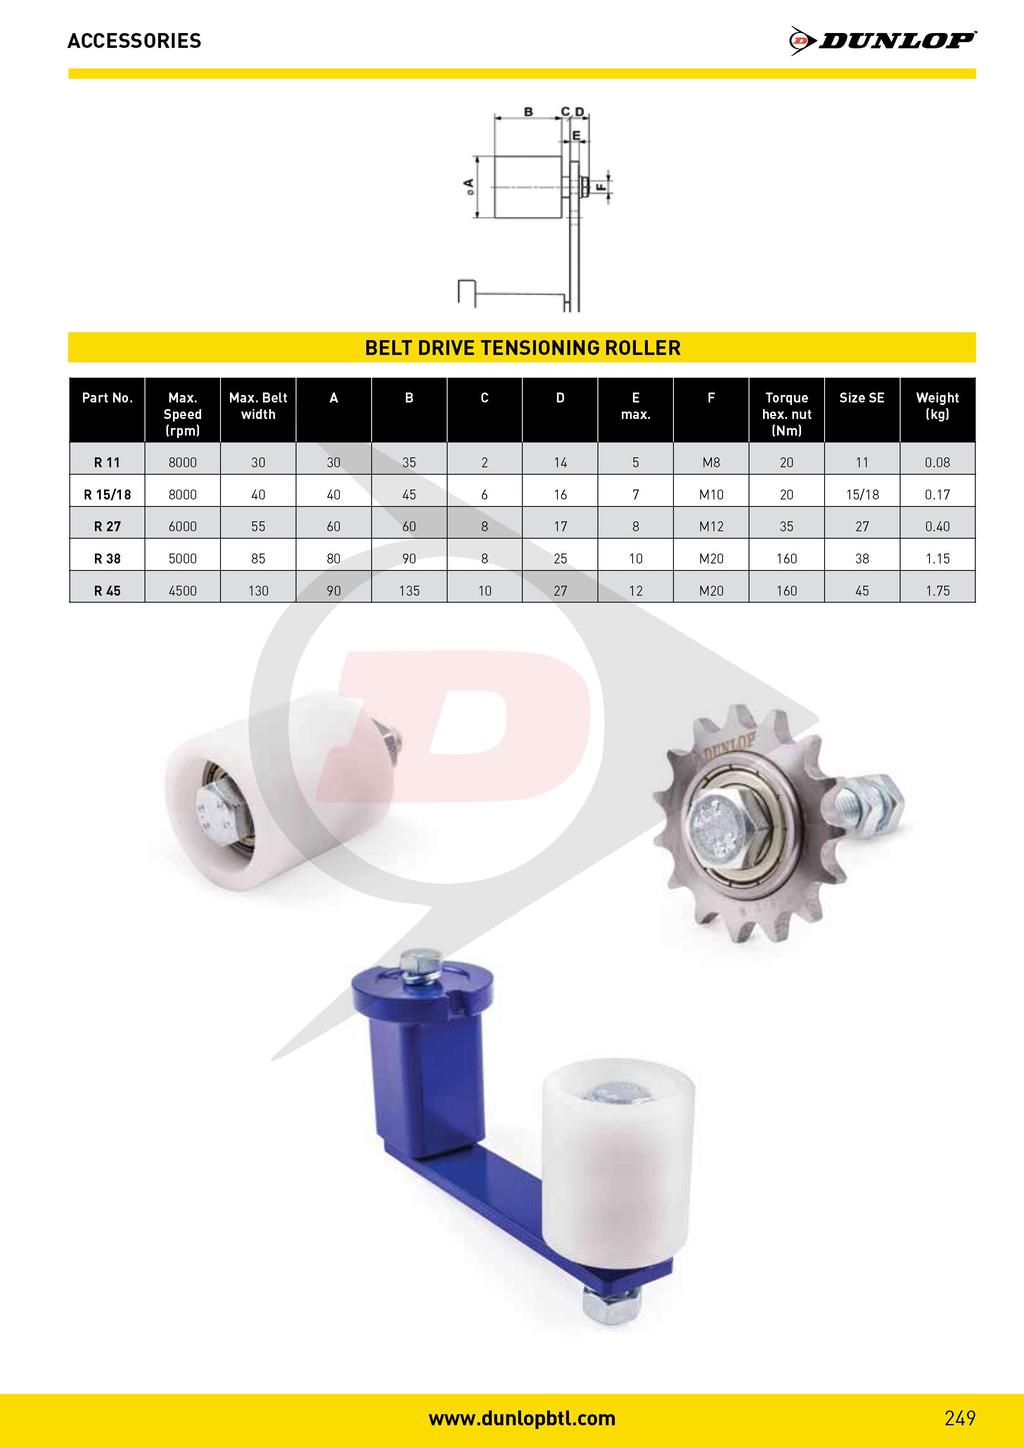 ACCESSORIES BELT DRIVE TENSIONING RQLLER Spec d (rpm ) Max. Belt width A B C D E max. F Torque hex. nut (Nm) Size SE Weight (kg) R 11 8000 30 30 35 2 14 5 M8 20 11 0.